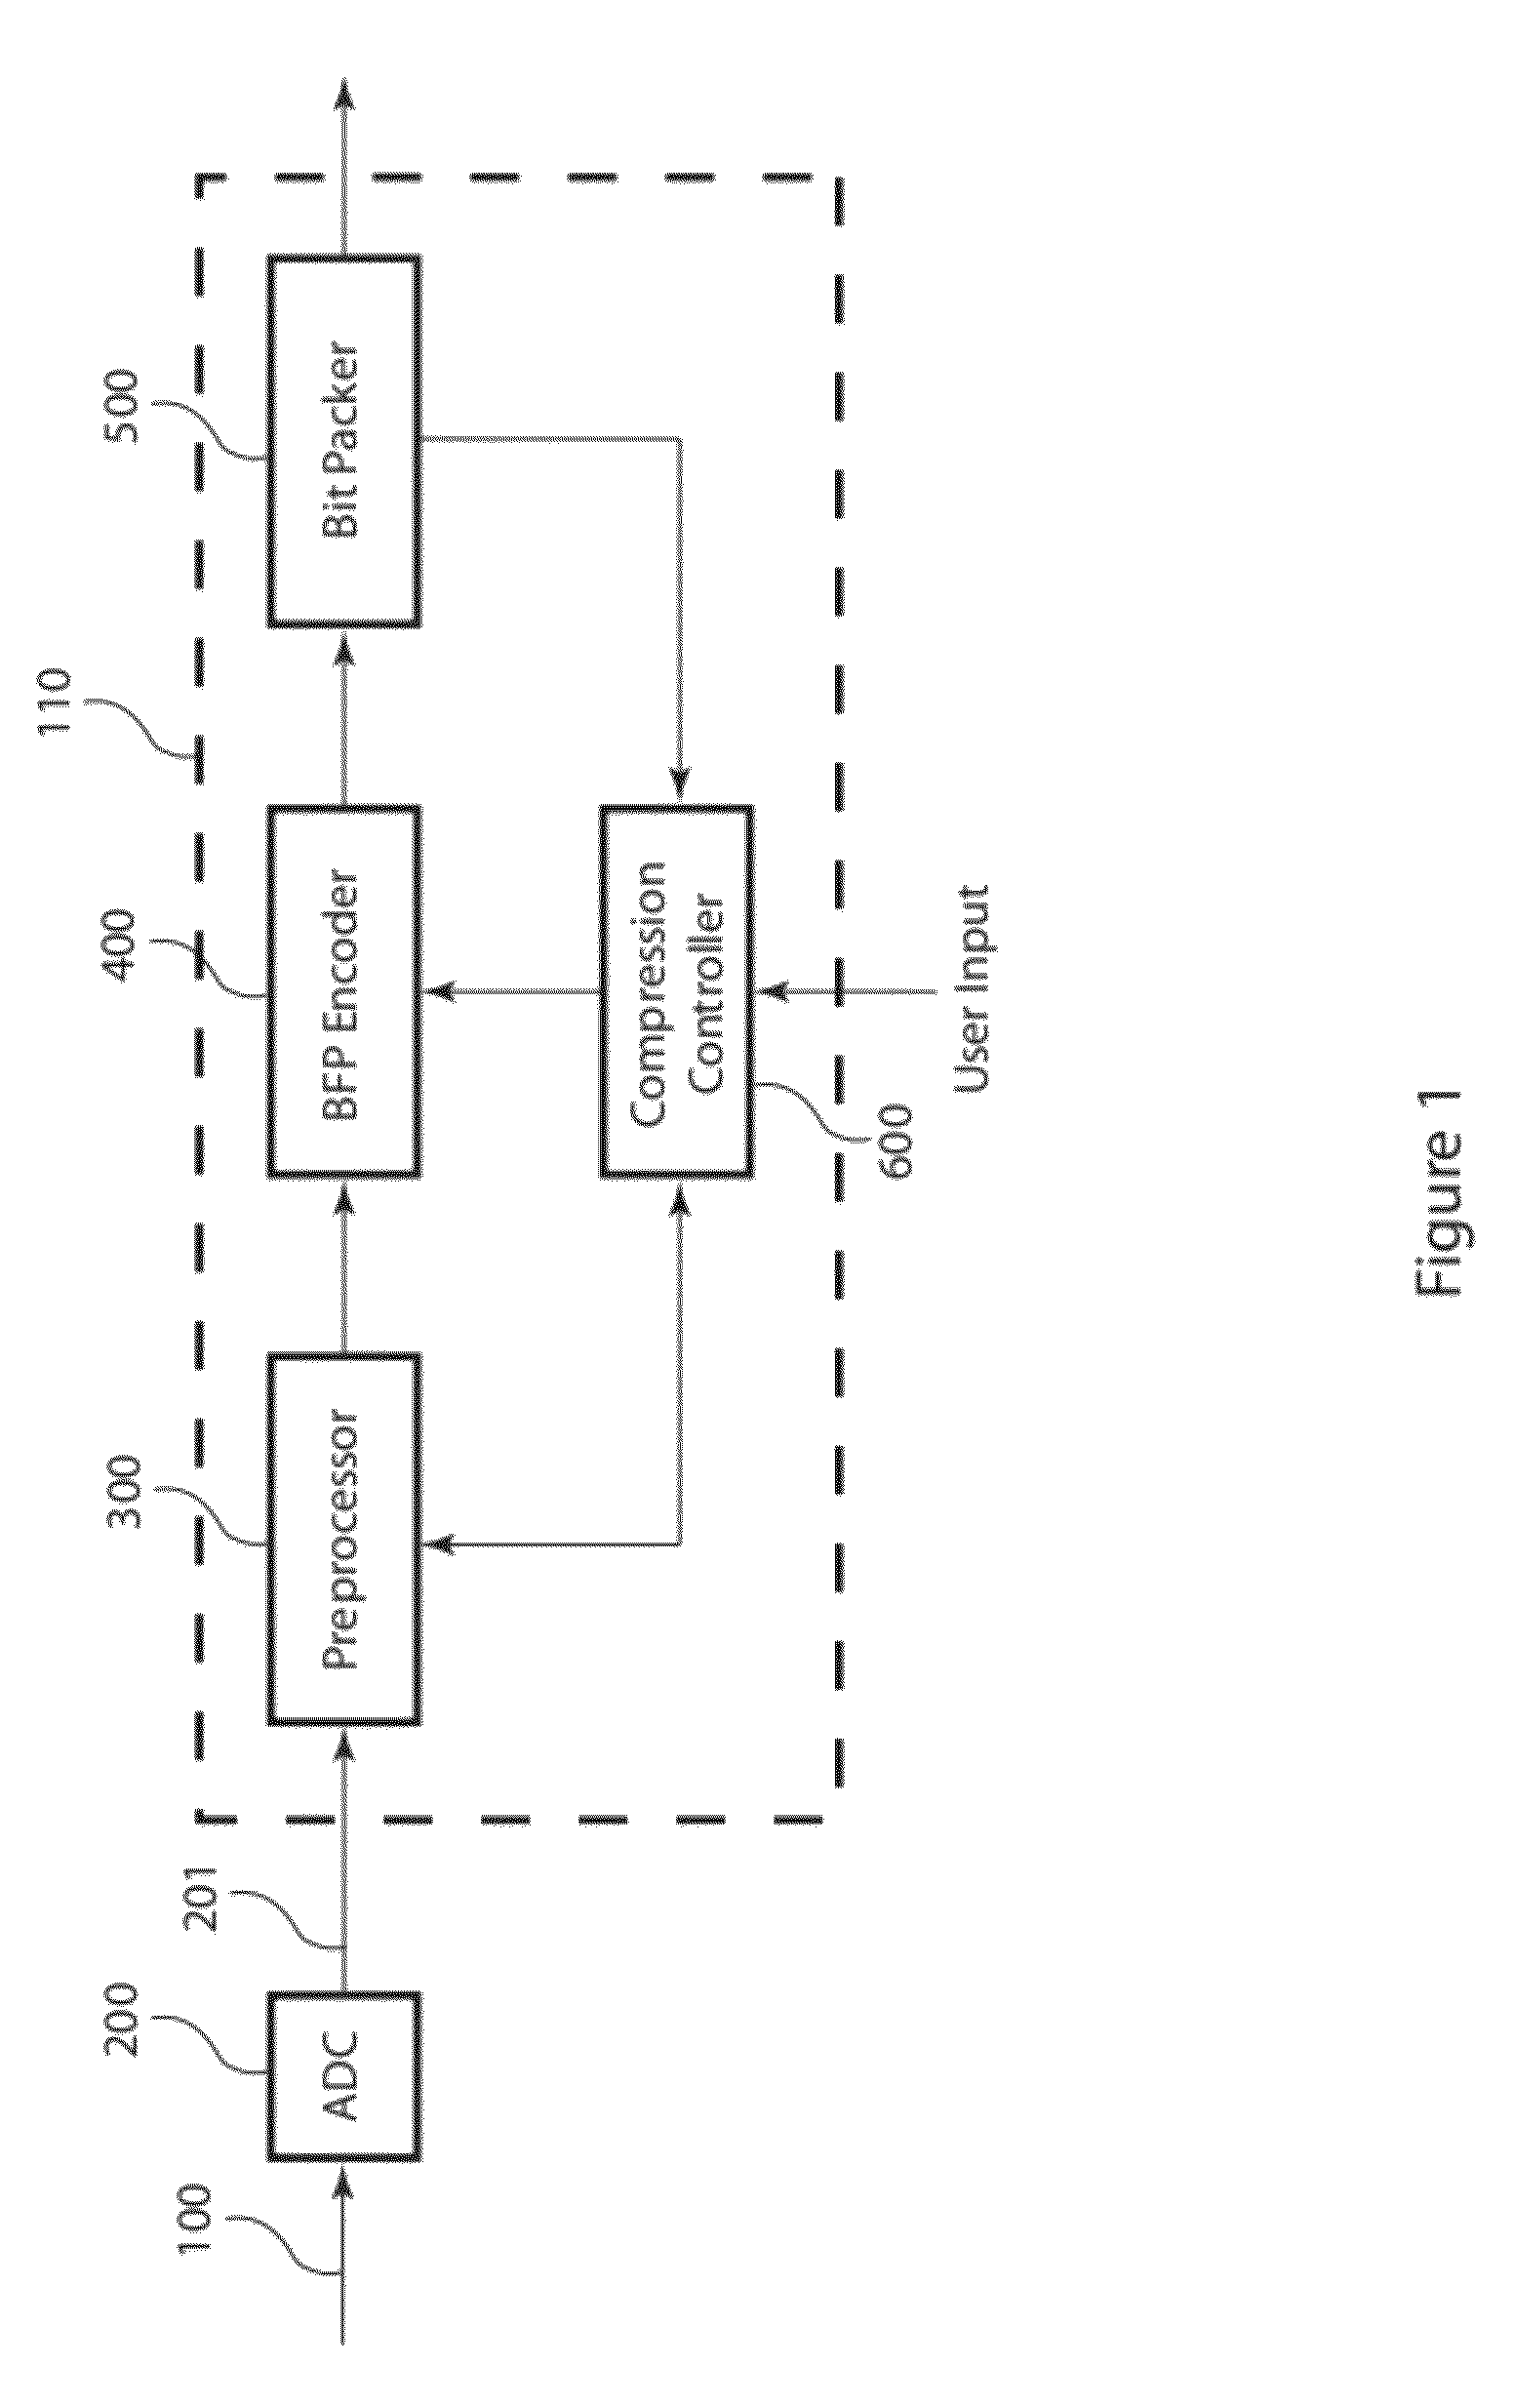 Block floating point compression of signal data